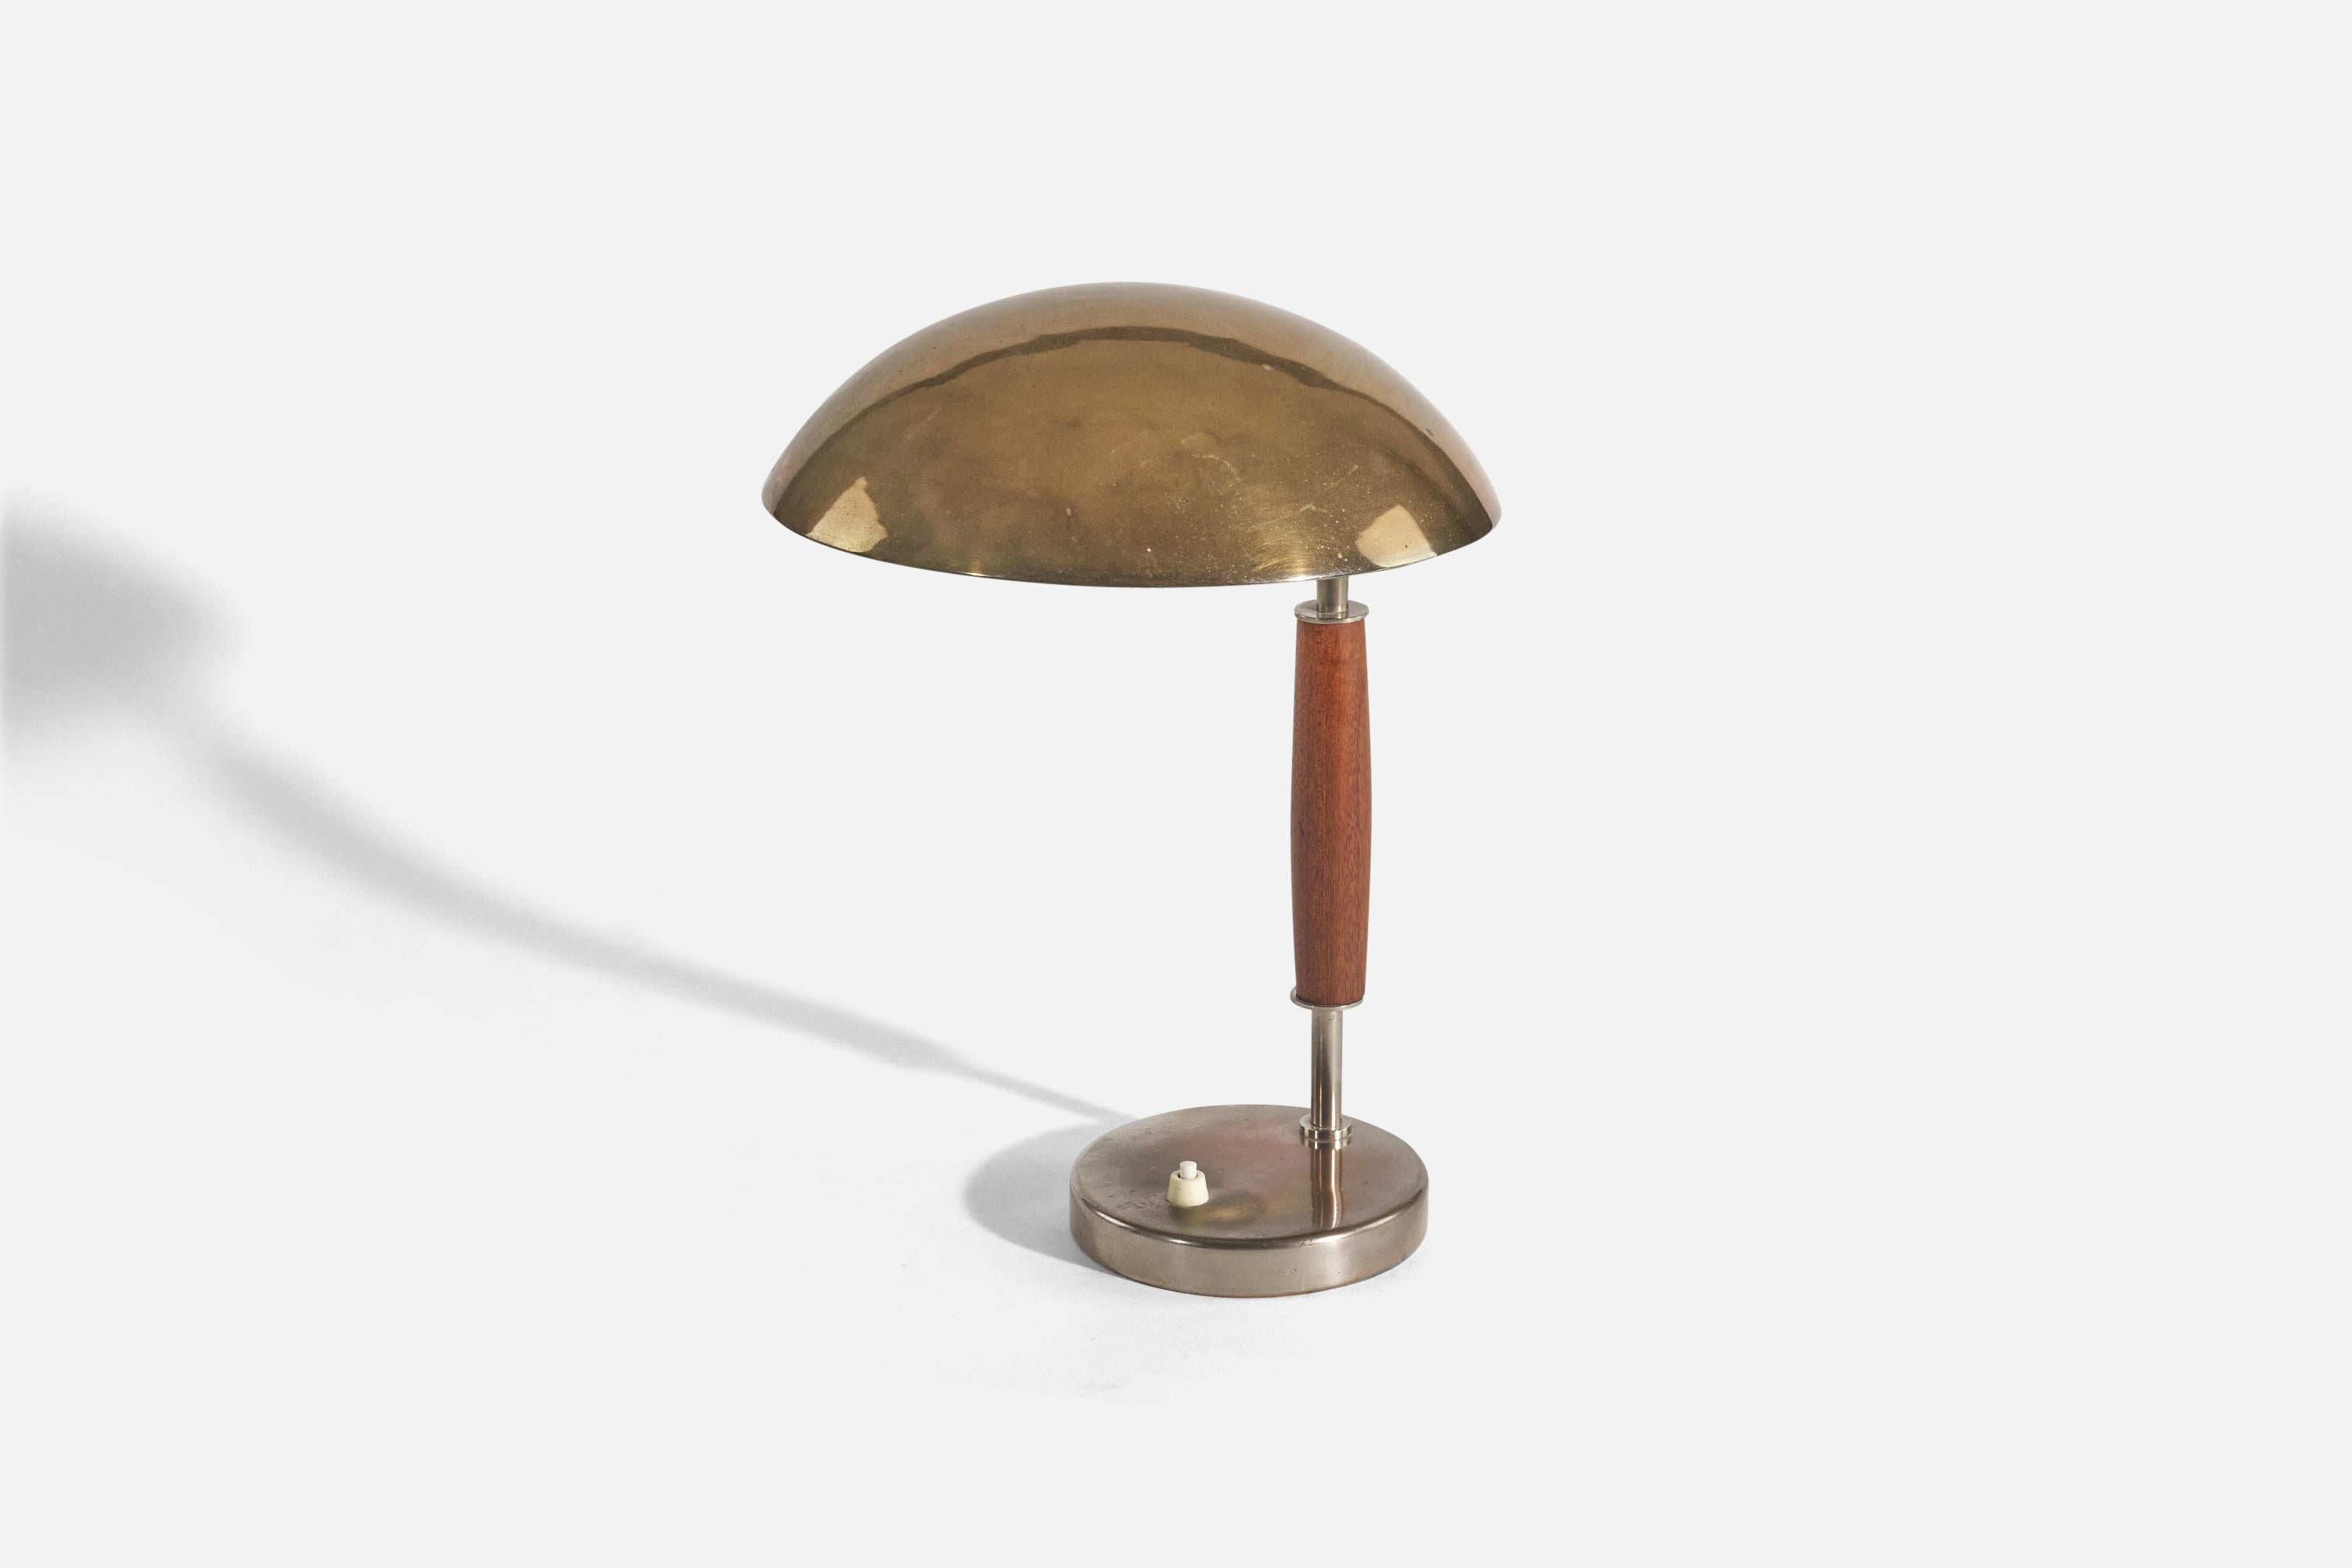 A brass, metal and stained wooden table lamp; design and production attributed to Böhlmarks, Sweden, circa 1940. 

Socket takes standard E-26 medium base bulb.
There is no maximum wattage stated on the fixture.